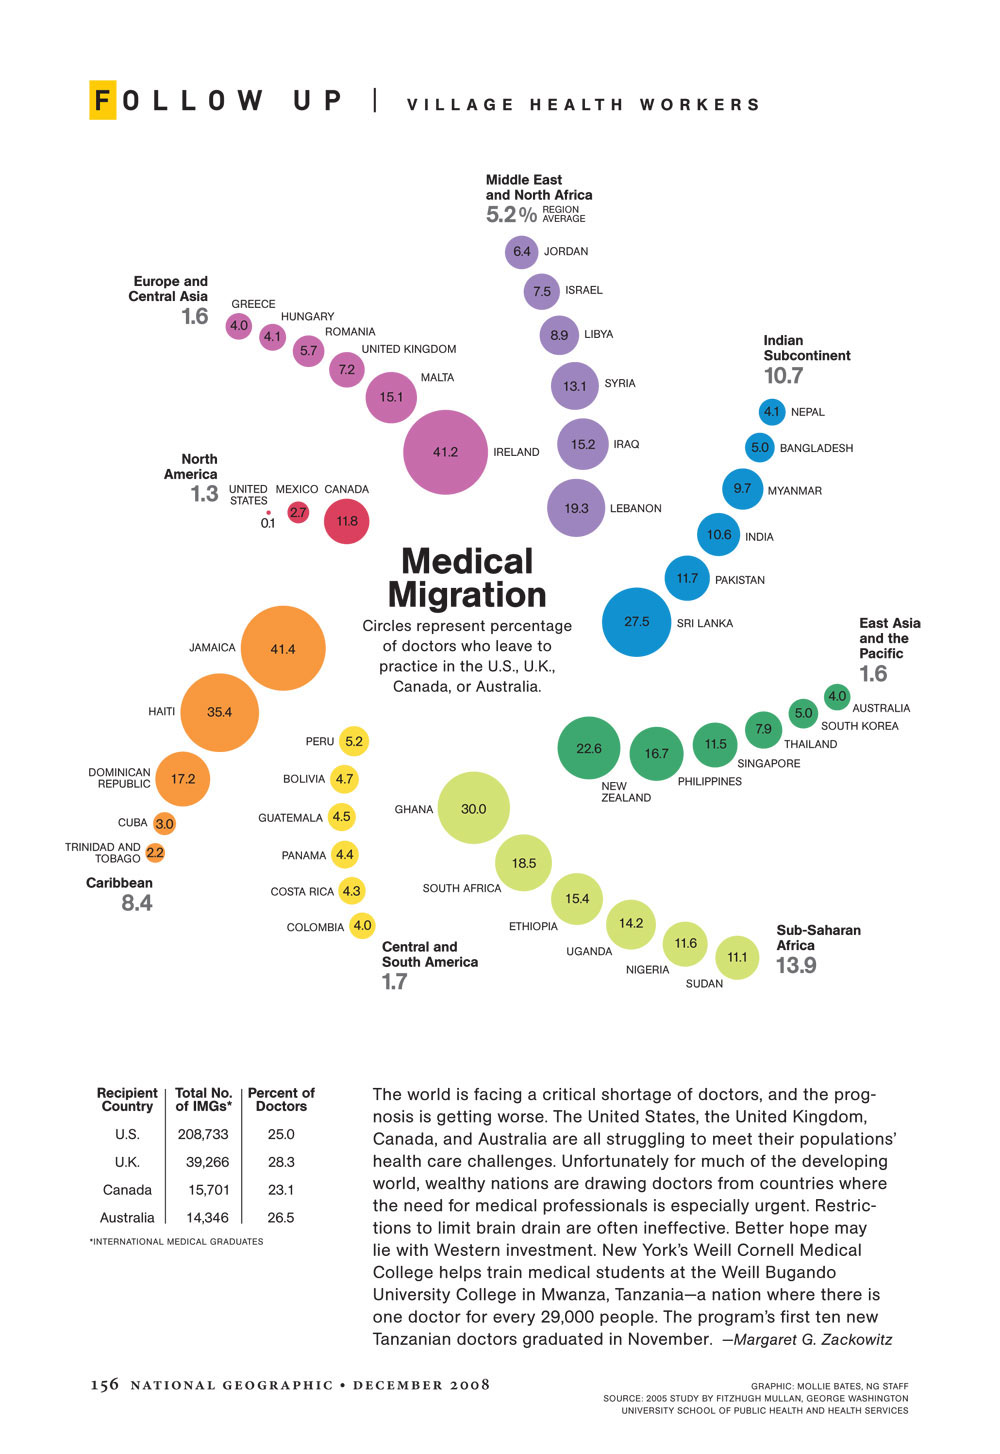 Data visualization of medical migration from the developing world